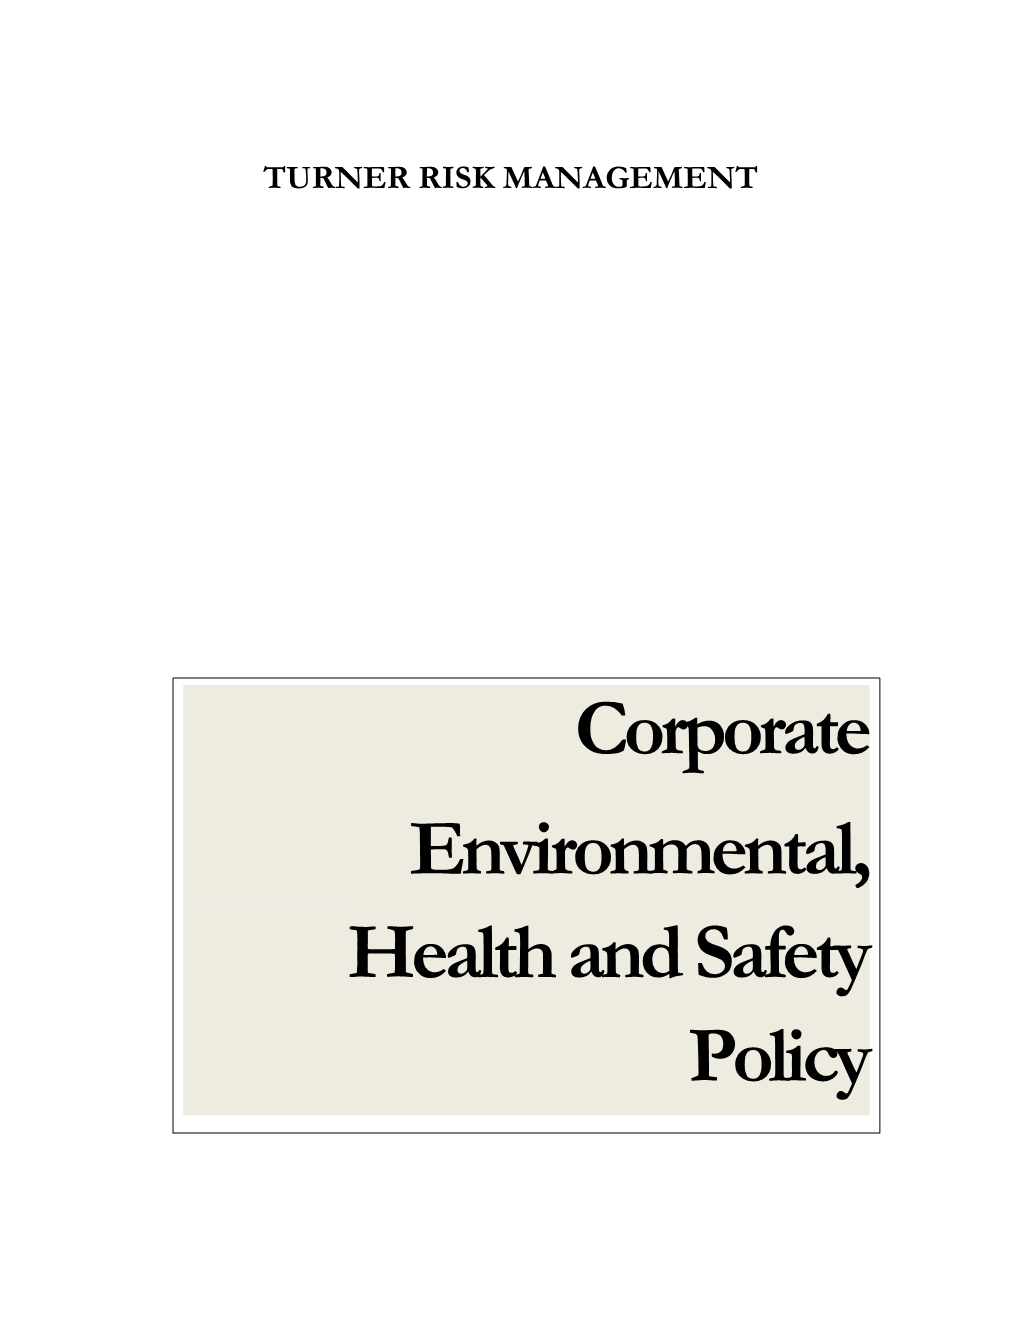 Corporate Environmental, Health and Safety Policy